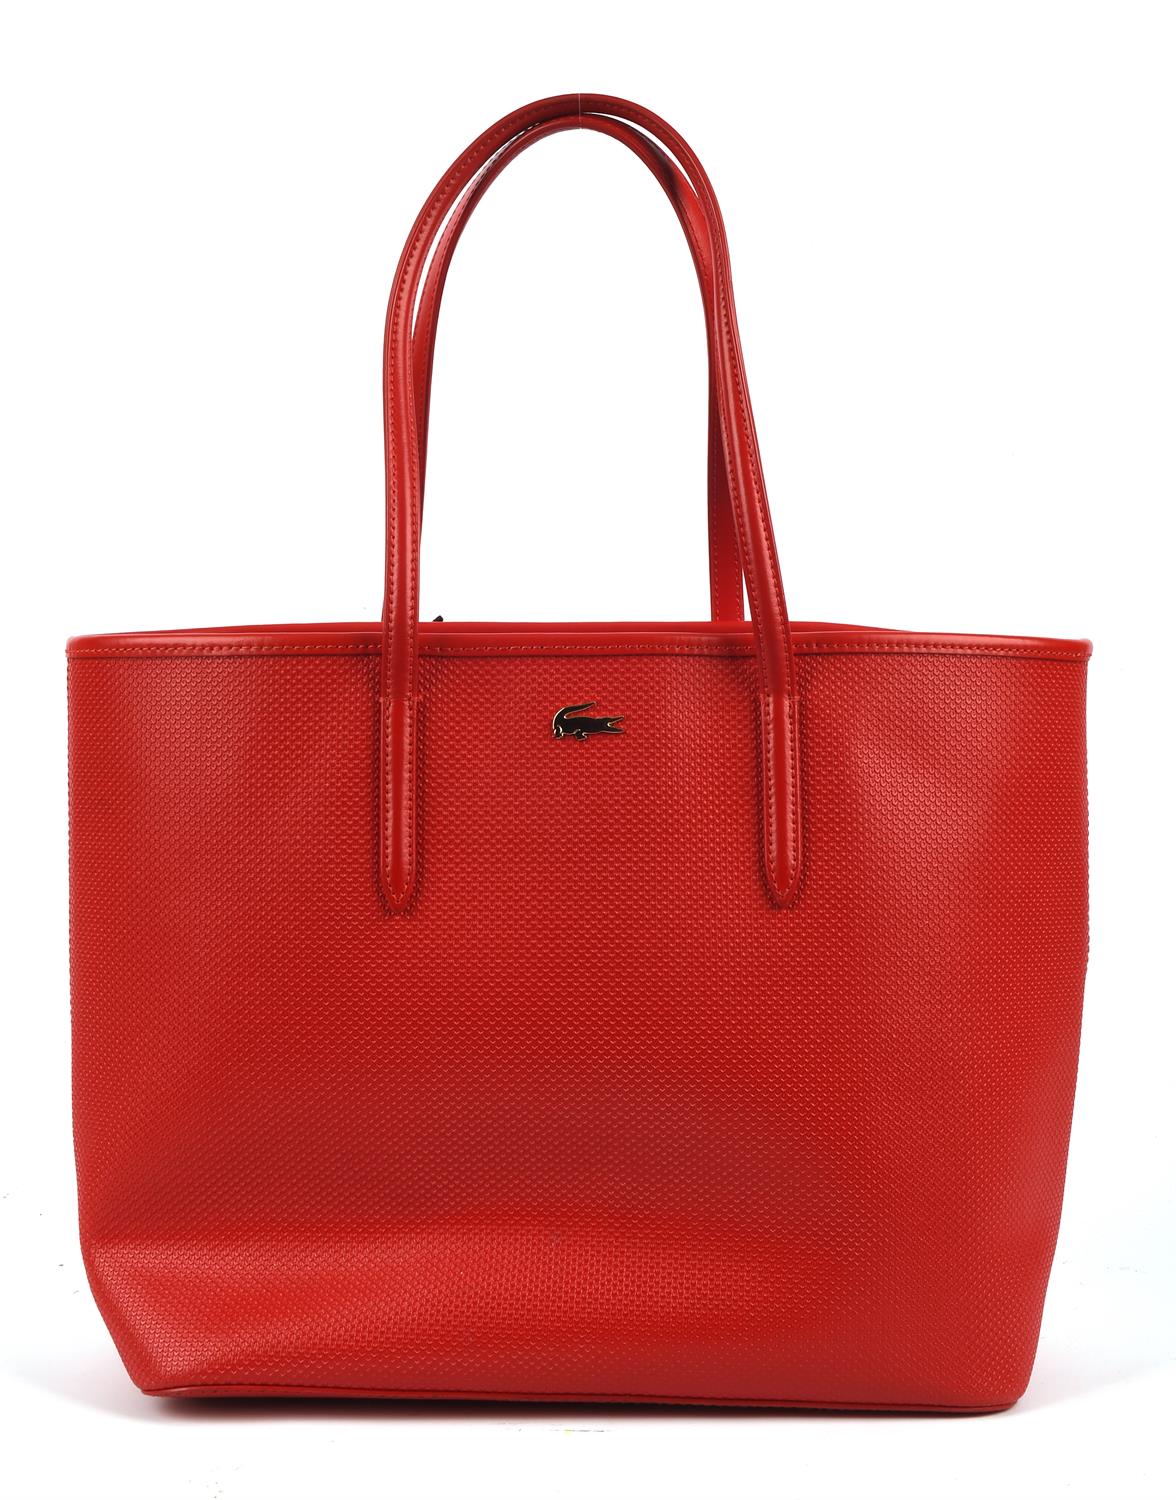 LACOSTE zipped "High Risk Red" split leather tote shopping bag (29cm x 29cm x 6cm)